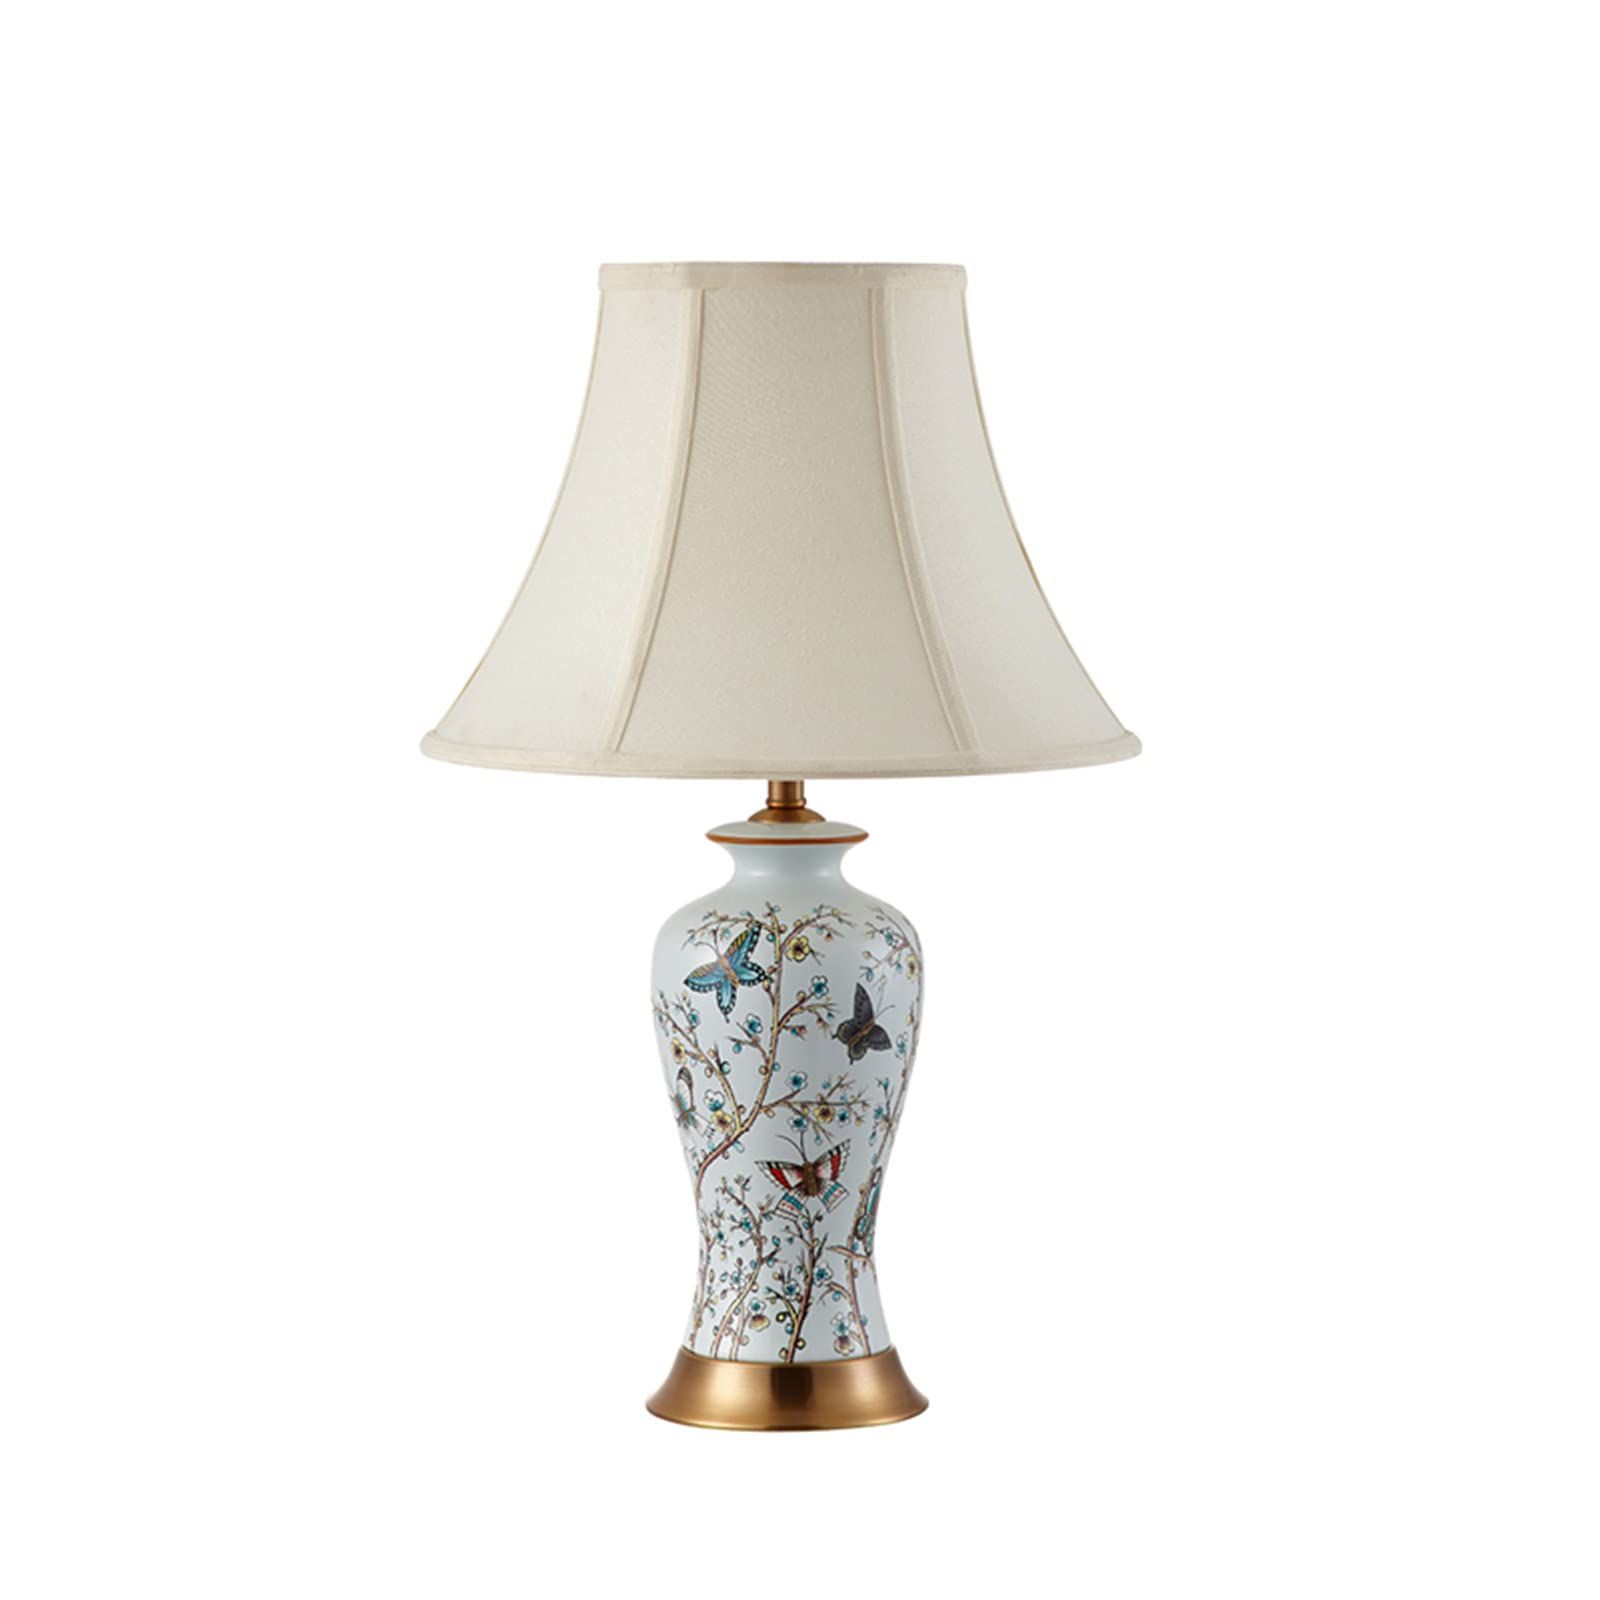 Taerau White Ceramic Table Lamps, Office Living Room Painted Pattern Golden  Carved Base Table Lamps 5736cm(size:5736cm) Inside Most Current Carved Pattern Standing Lamps (View 7 of 15)